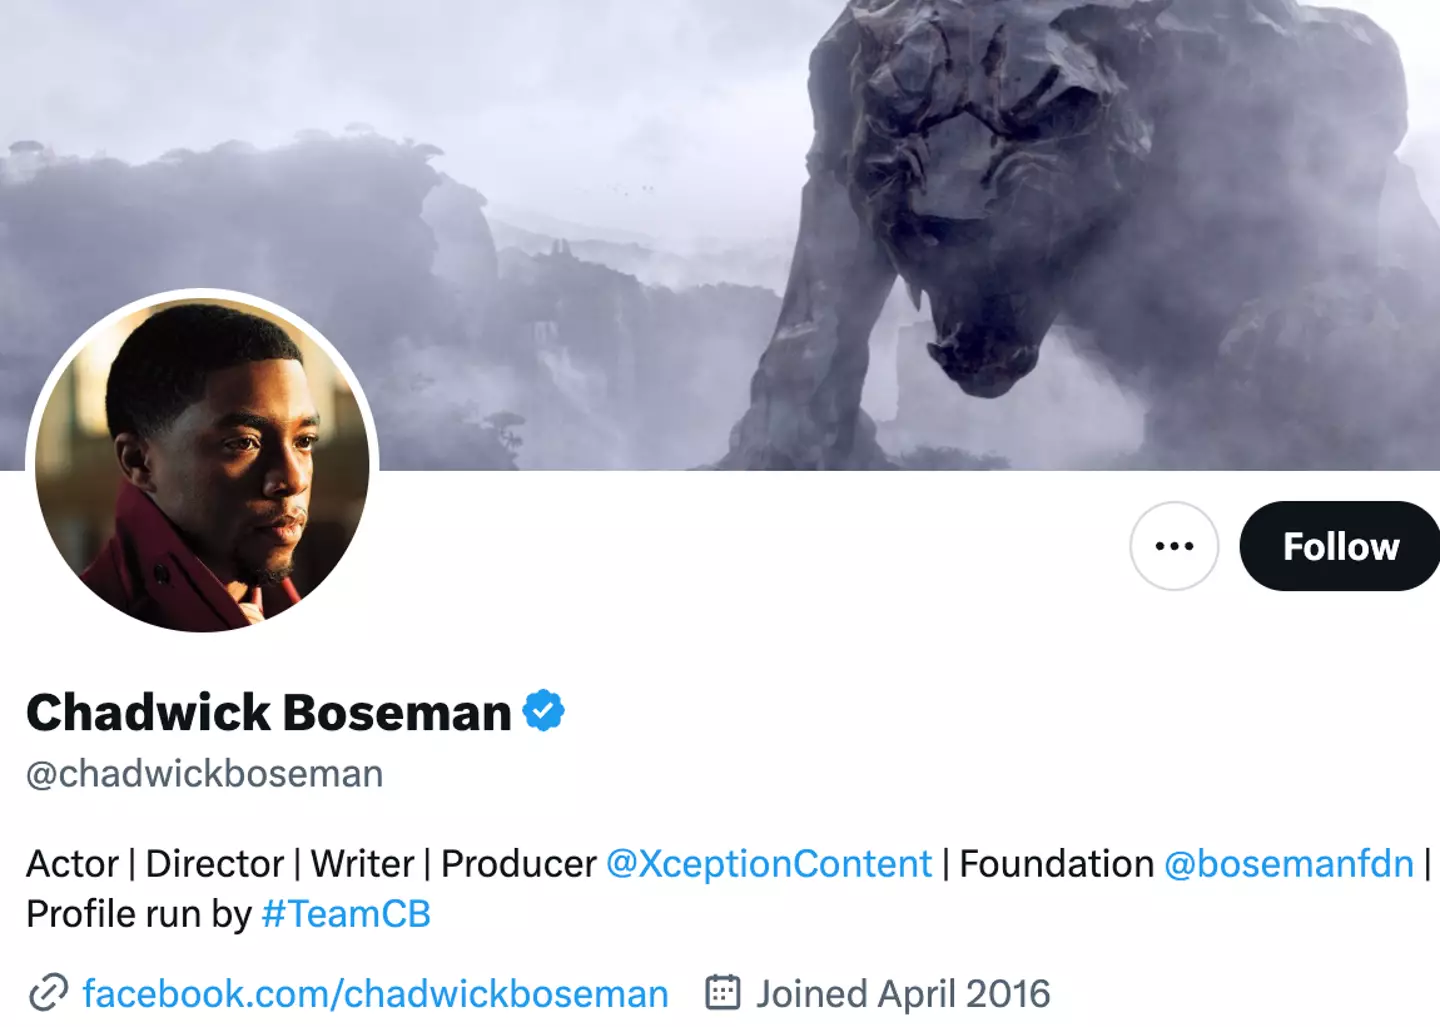 Late stars like Chadwick Boseman lost their legacy verification, but inexplicably gained a Twitter Blue tick.